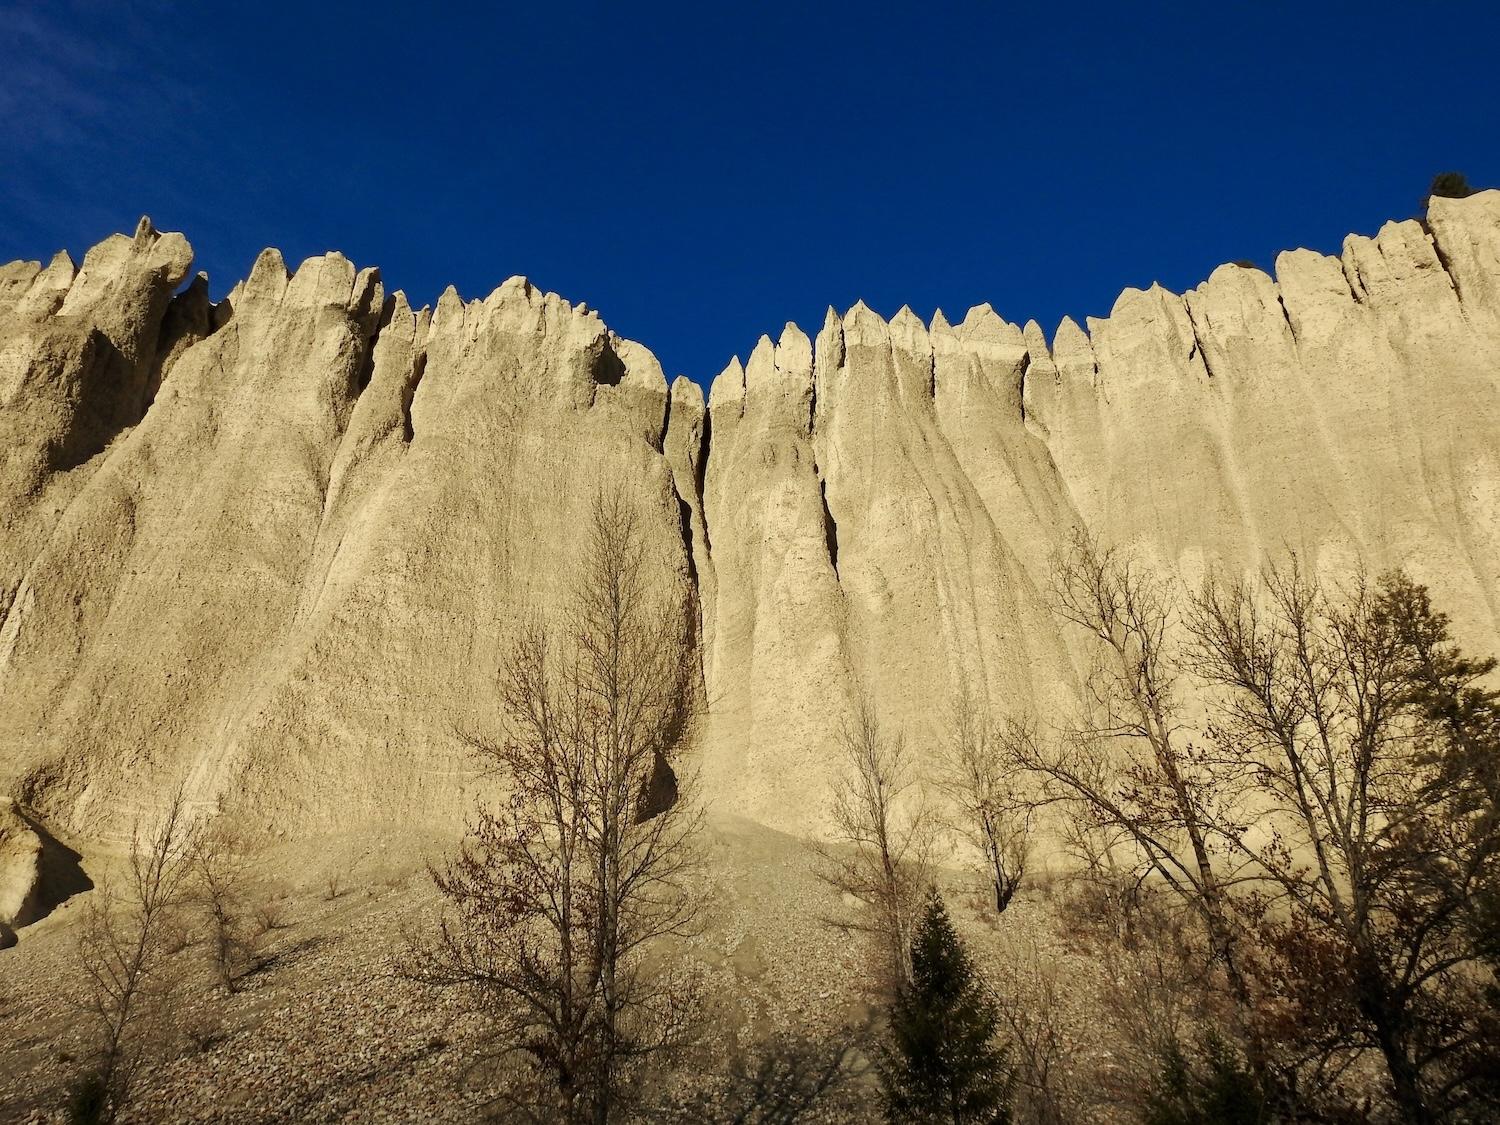 After hiking to the top of the Dutch Creek Hoodoos Conservation Area, view the eroded sandstone cliffs from the highway below.